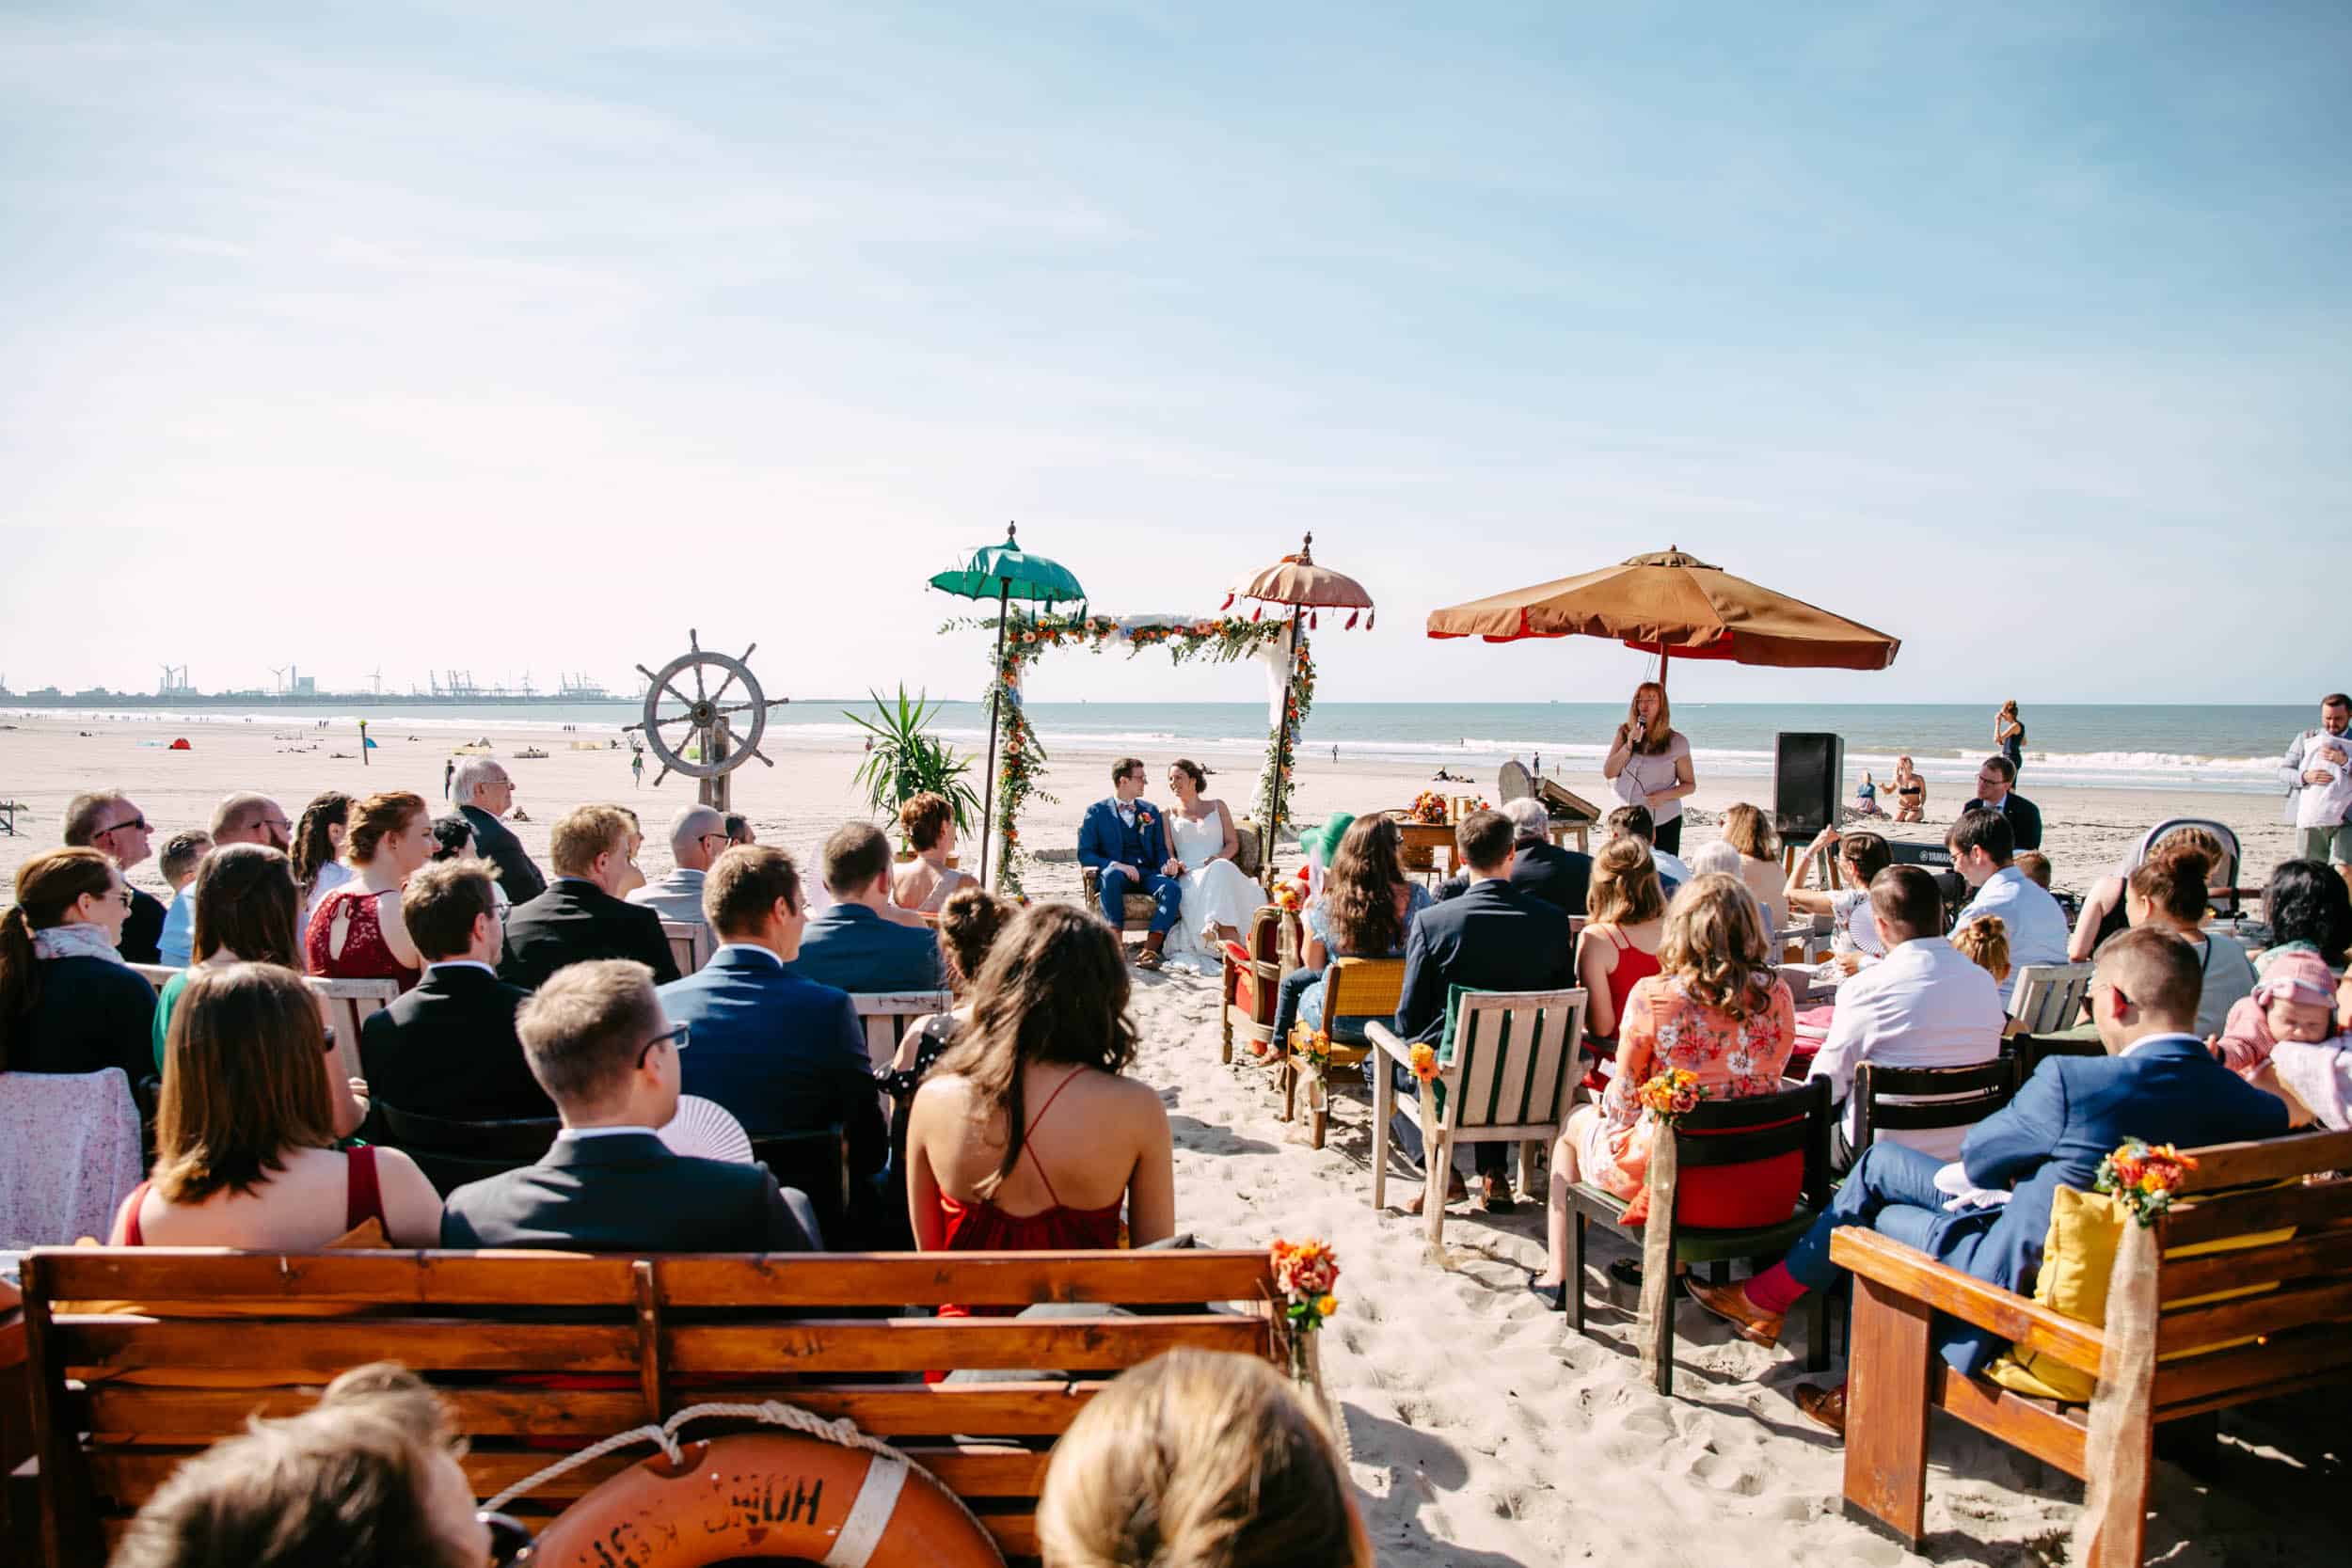 A beach wedding ceremony, complete with chairs and umbrellas, showcasing the elements of a perfect seaside celebration.